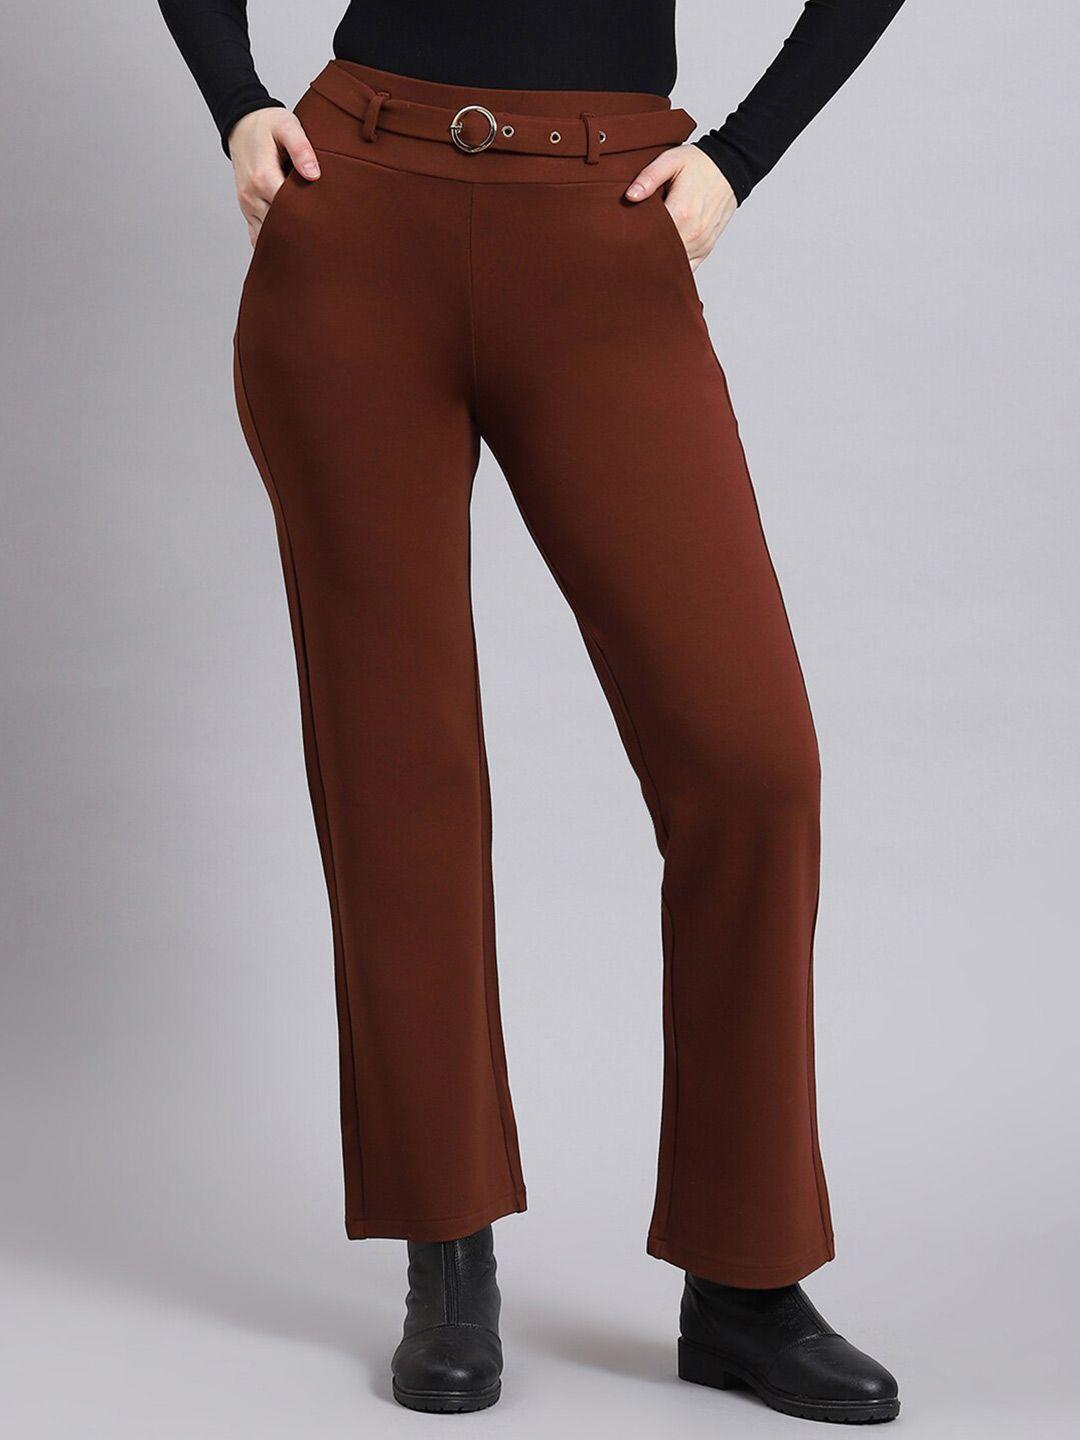 monte carlo women mid rise cropped trousers